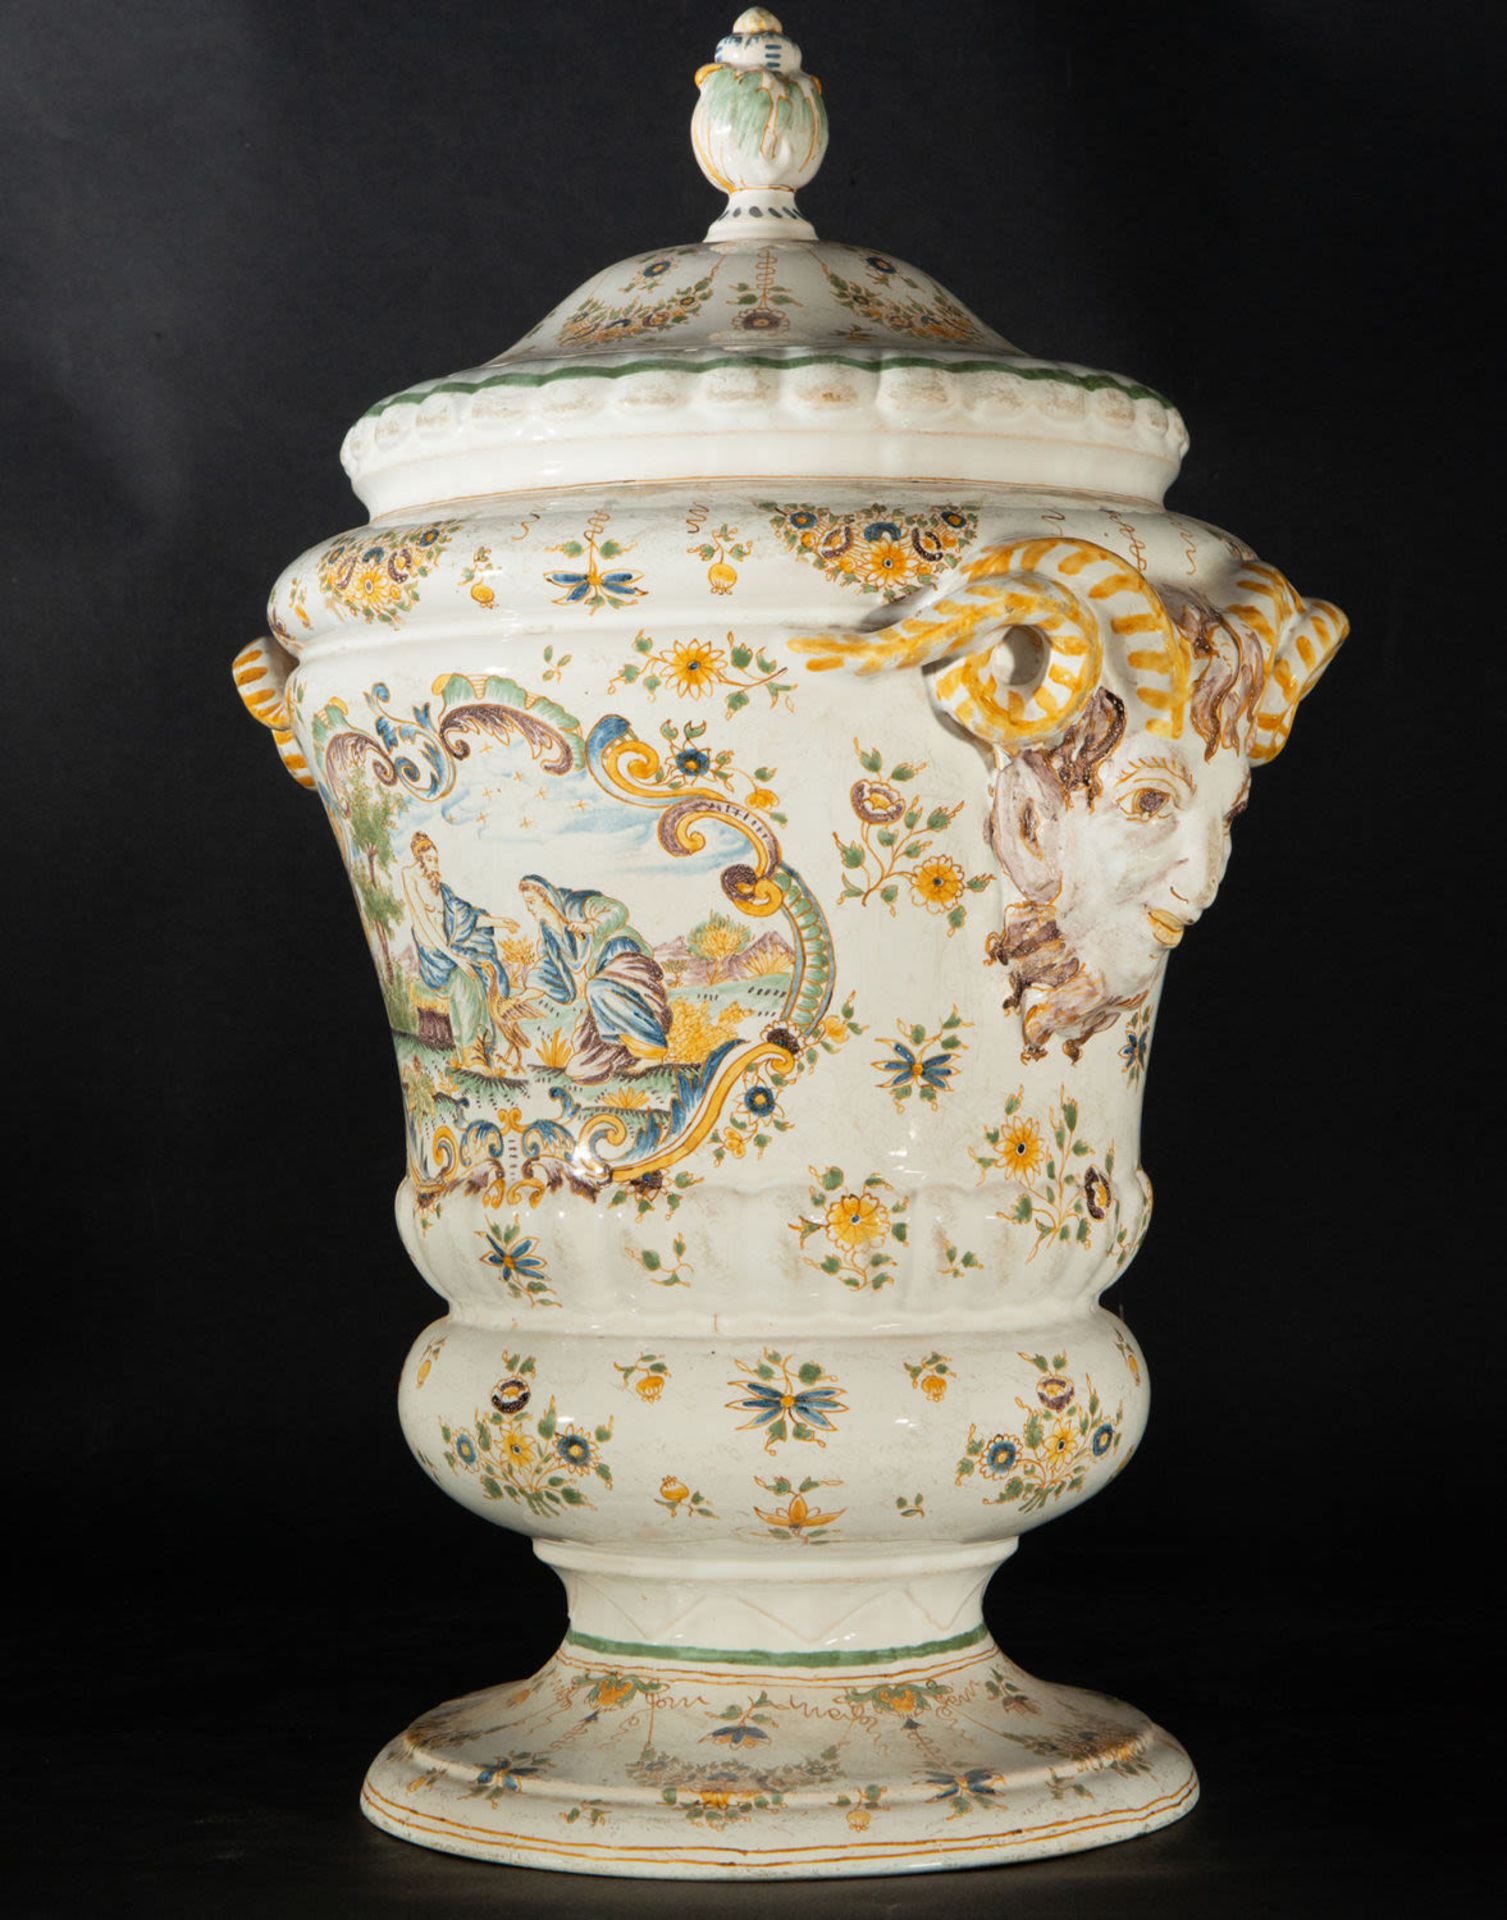 Ceramic vase from Moustiers, France, 18th century - Image 4 of 6